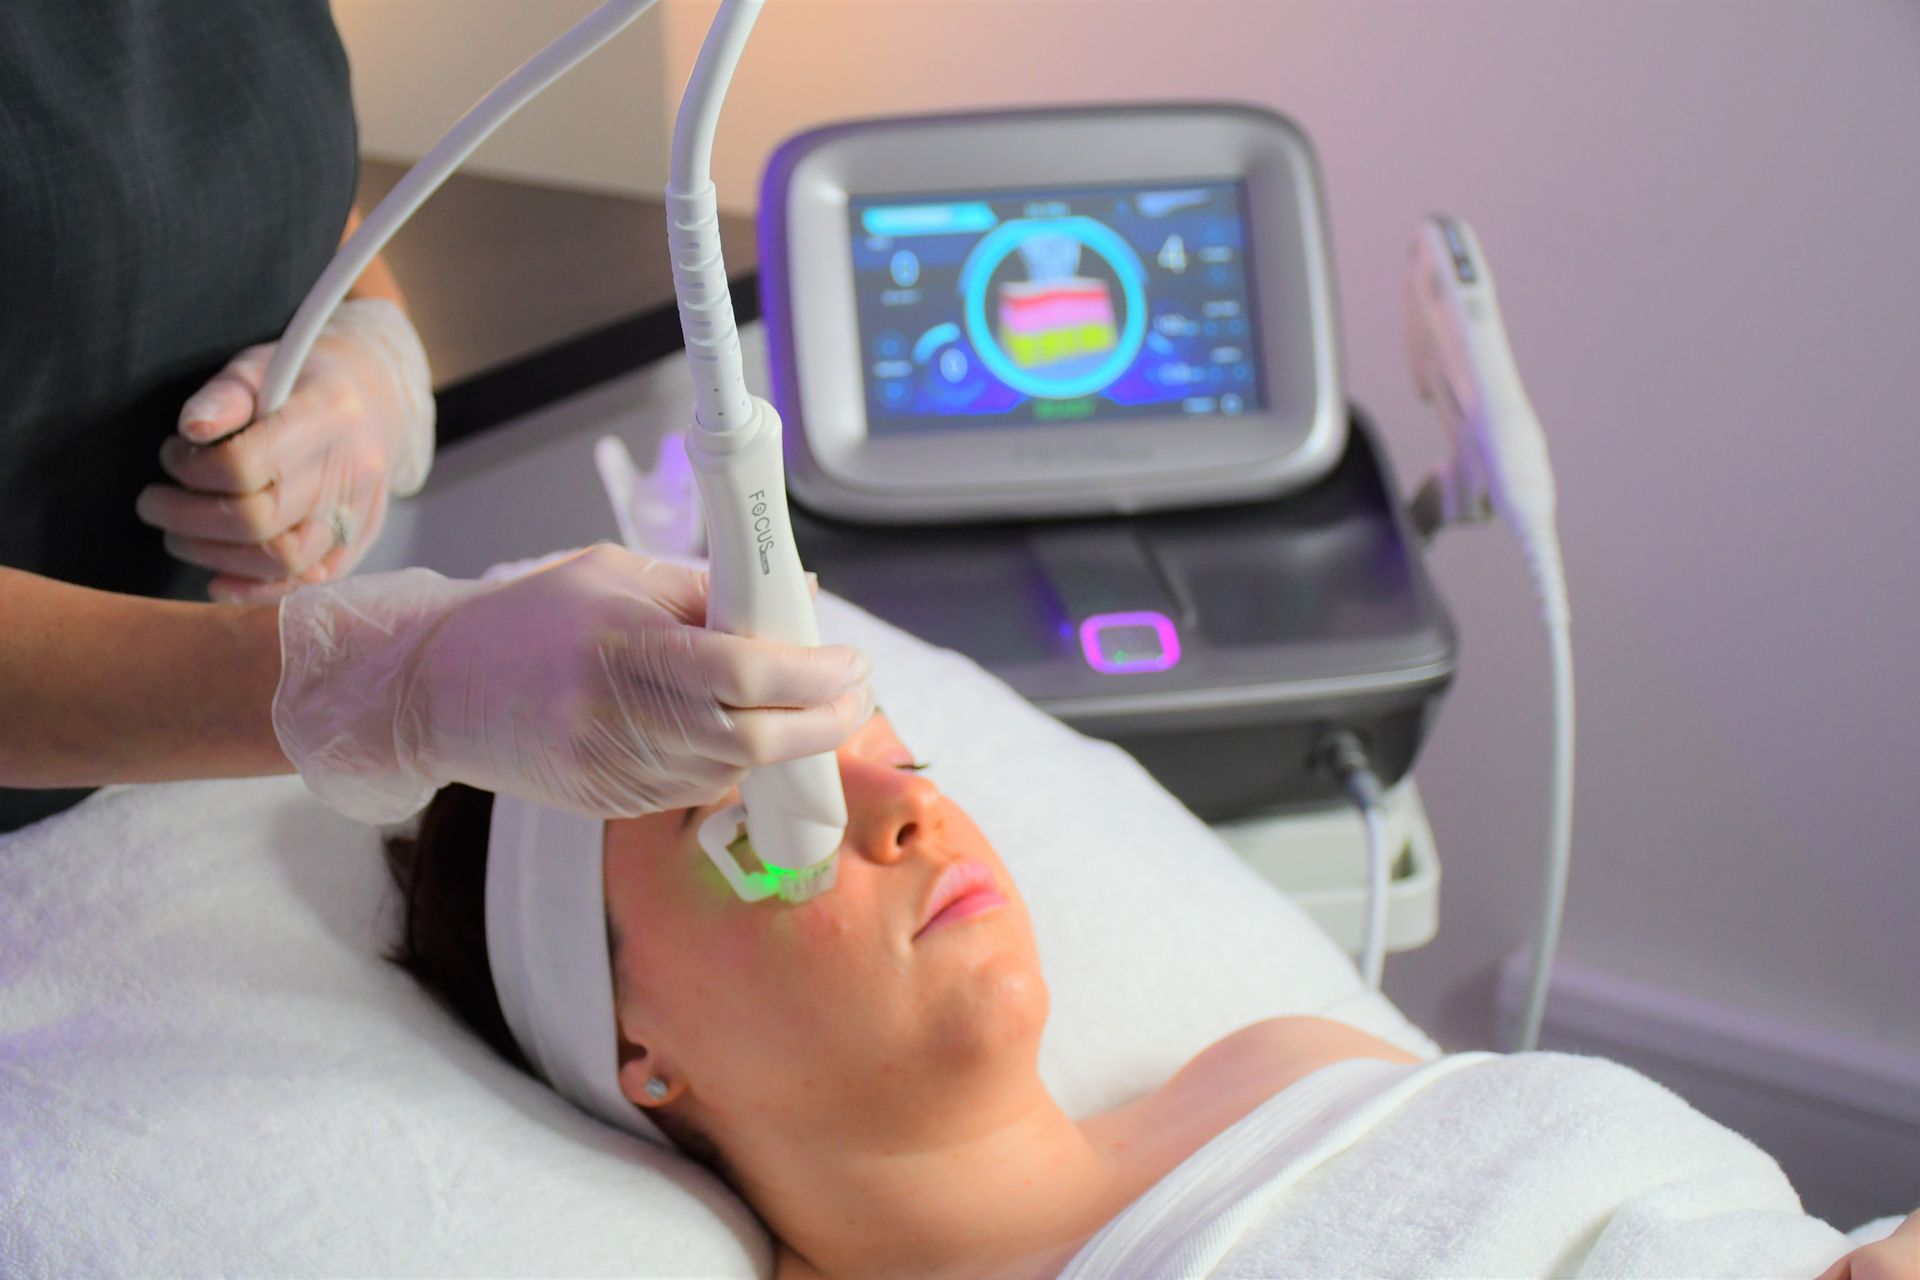 Radiofrequency Microneedling & Hifu Treatments at Collective Hairdressing™ Beauty & Skin